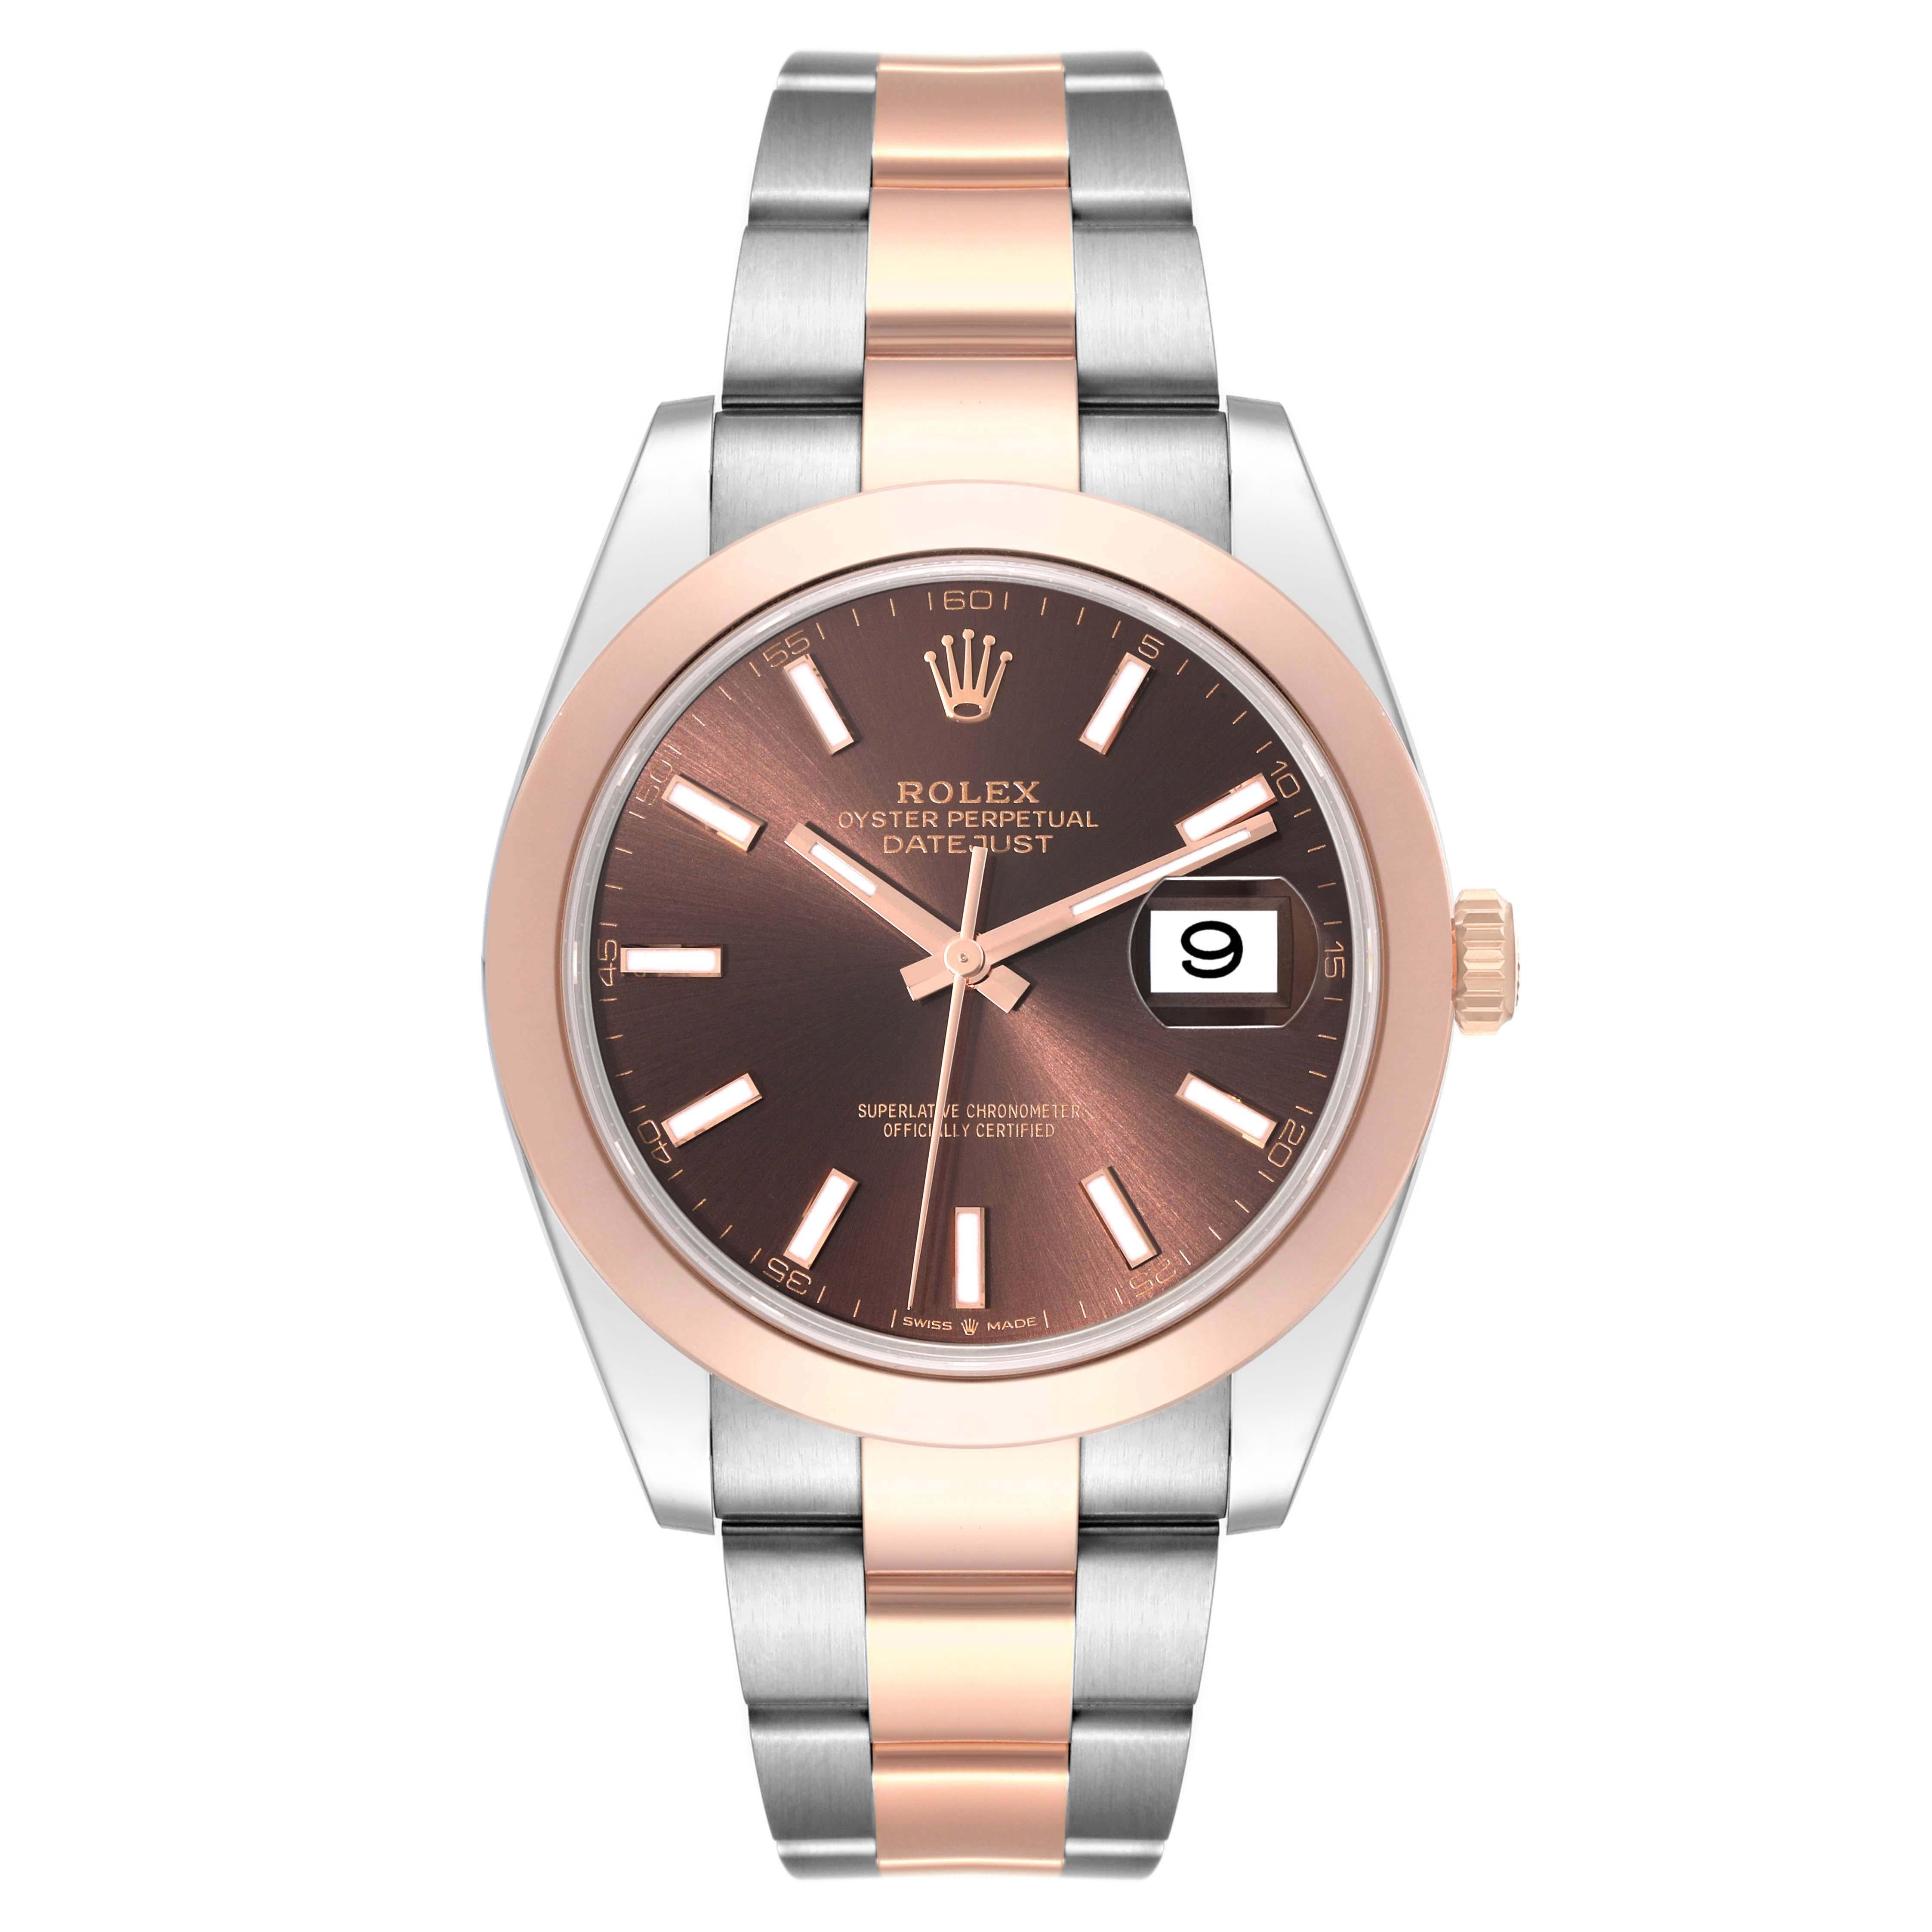 Rolex Datejust 41 Steel Rose Gold Brown Dial Mens Watch 126301 Box Card. Officially certified chronometer self-winding movement. Stainless steel and 18K everose gold case 41.0 mm in diameter. Rolex logo on a crown. 18K rose gold smooth domed bezel.